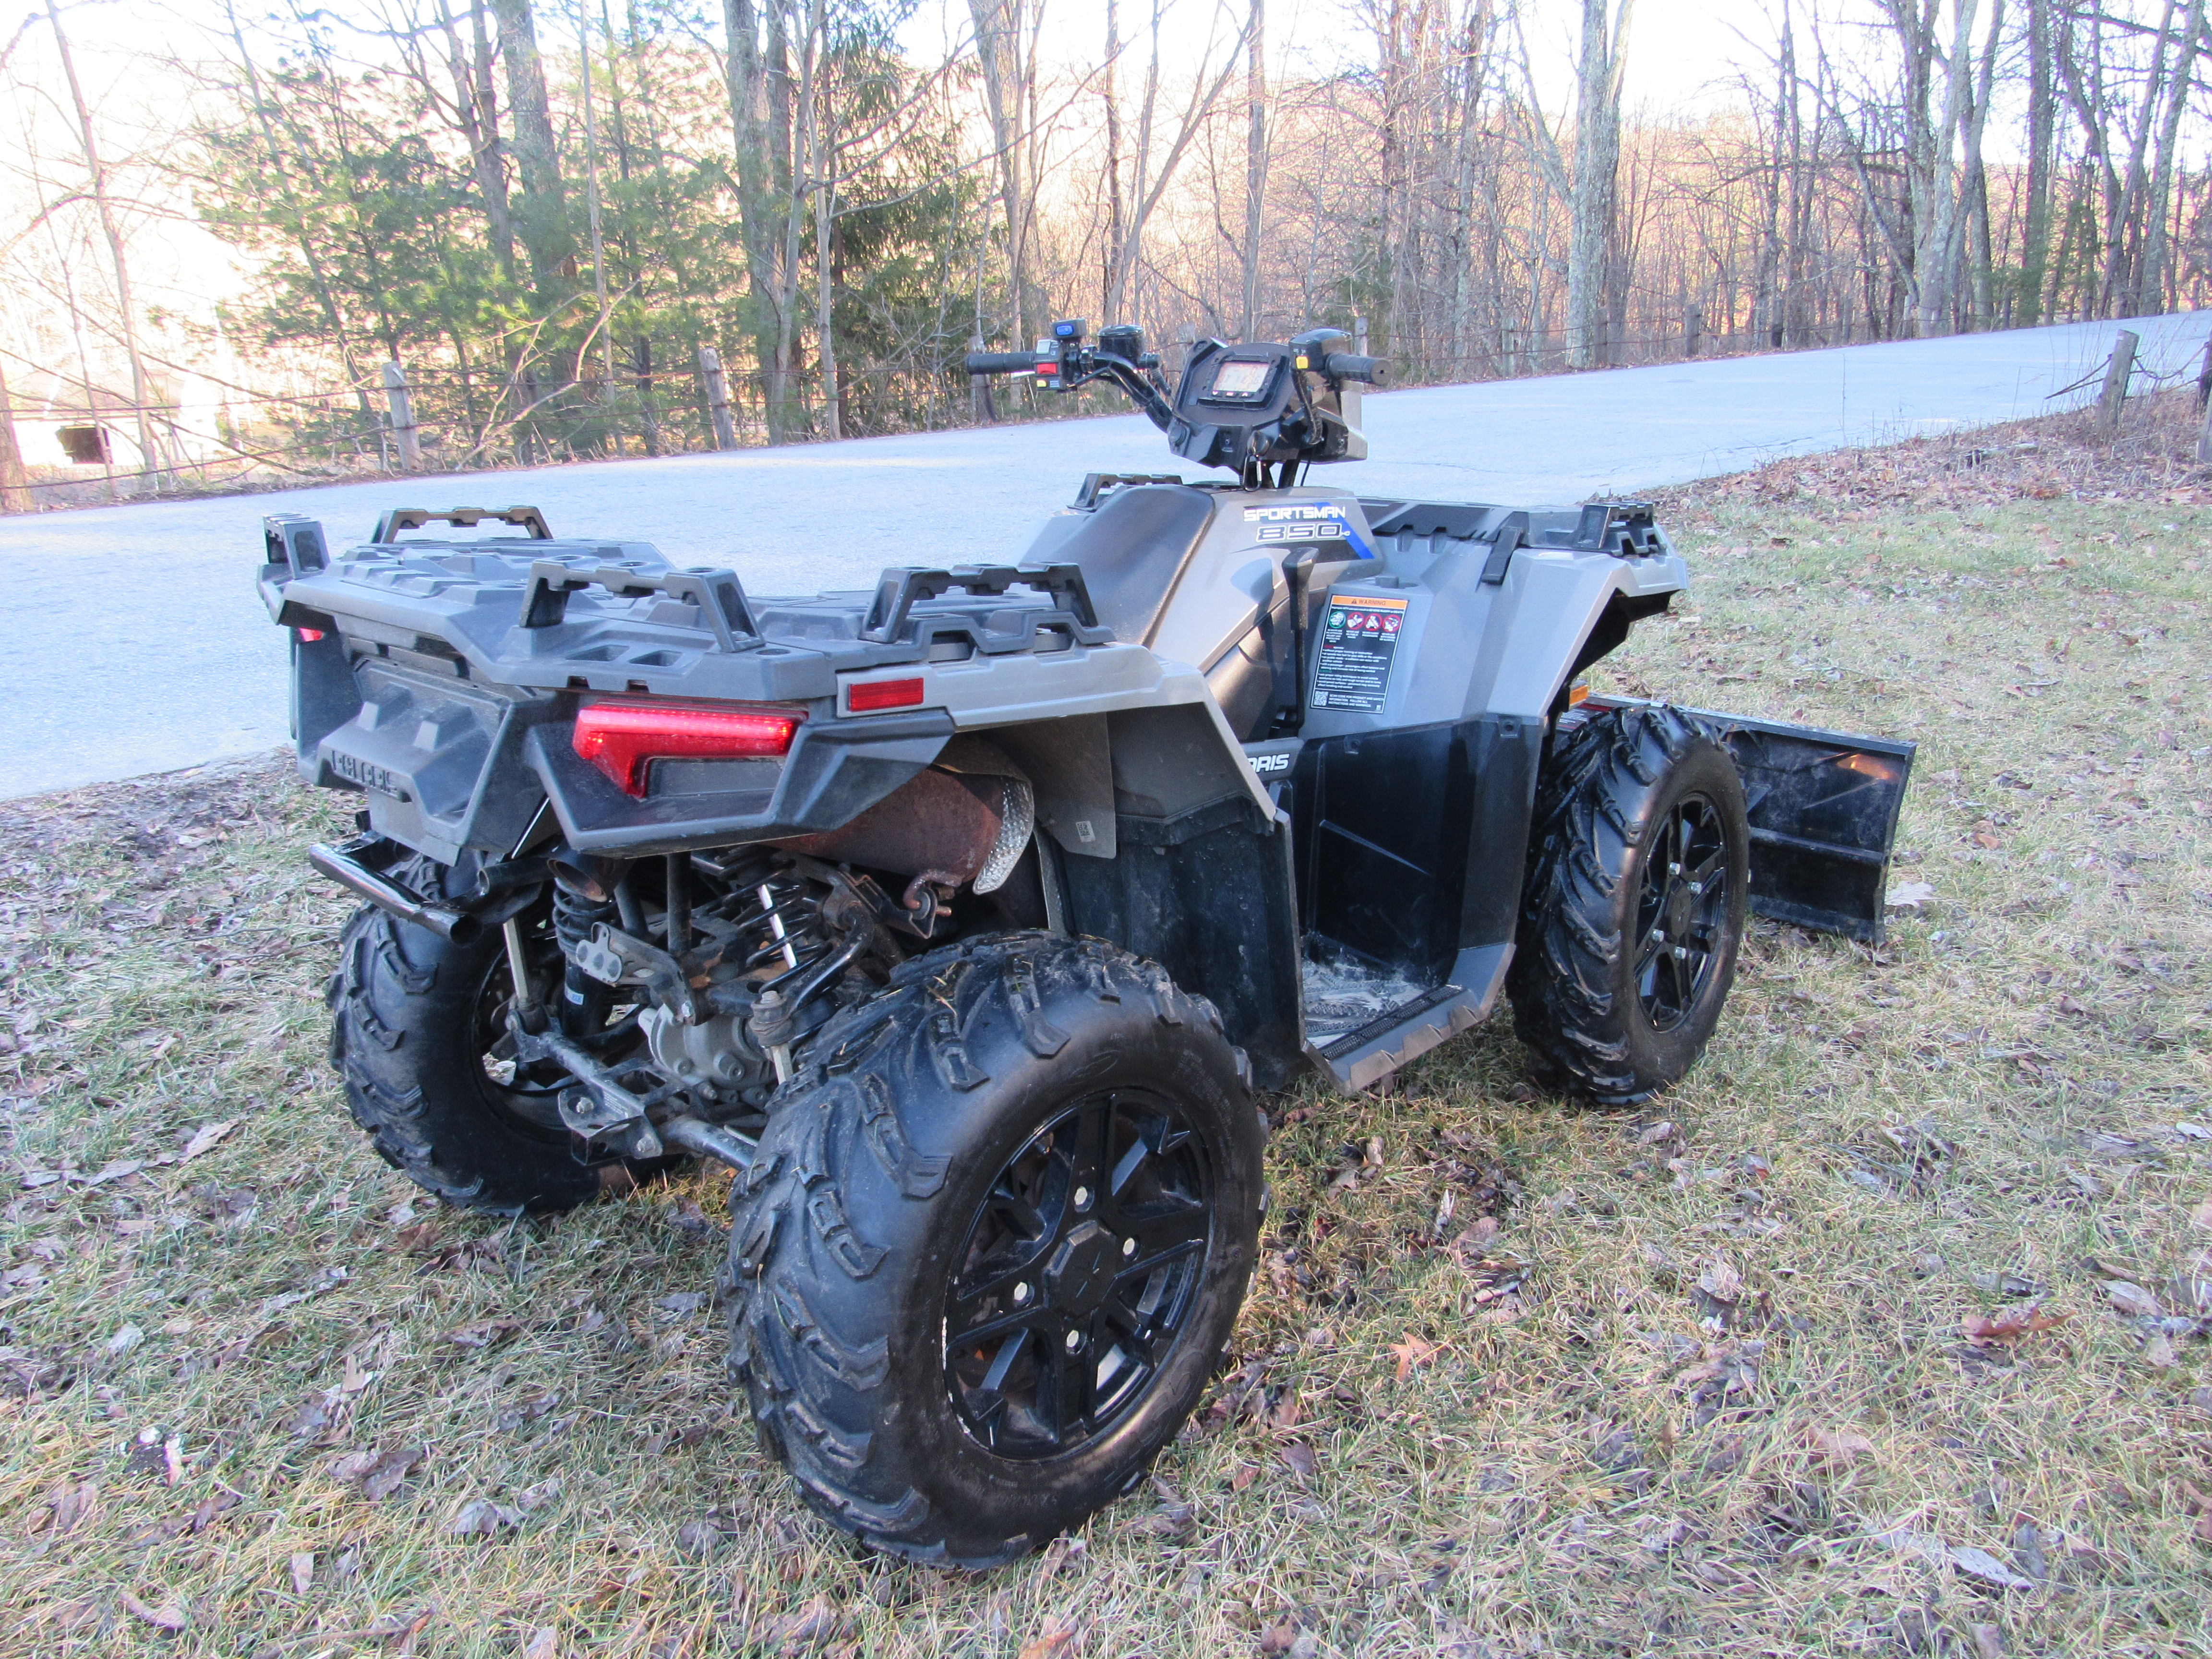 2019 SPORTSMAN 850 WITH PLOW AND WINCH SPORTSMAN 850 WITH PLOW AND WINCH 5708 - Click for larger photo